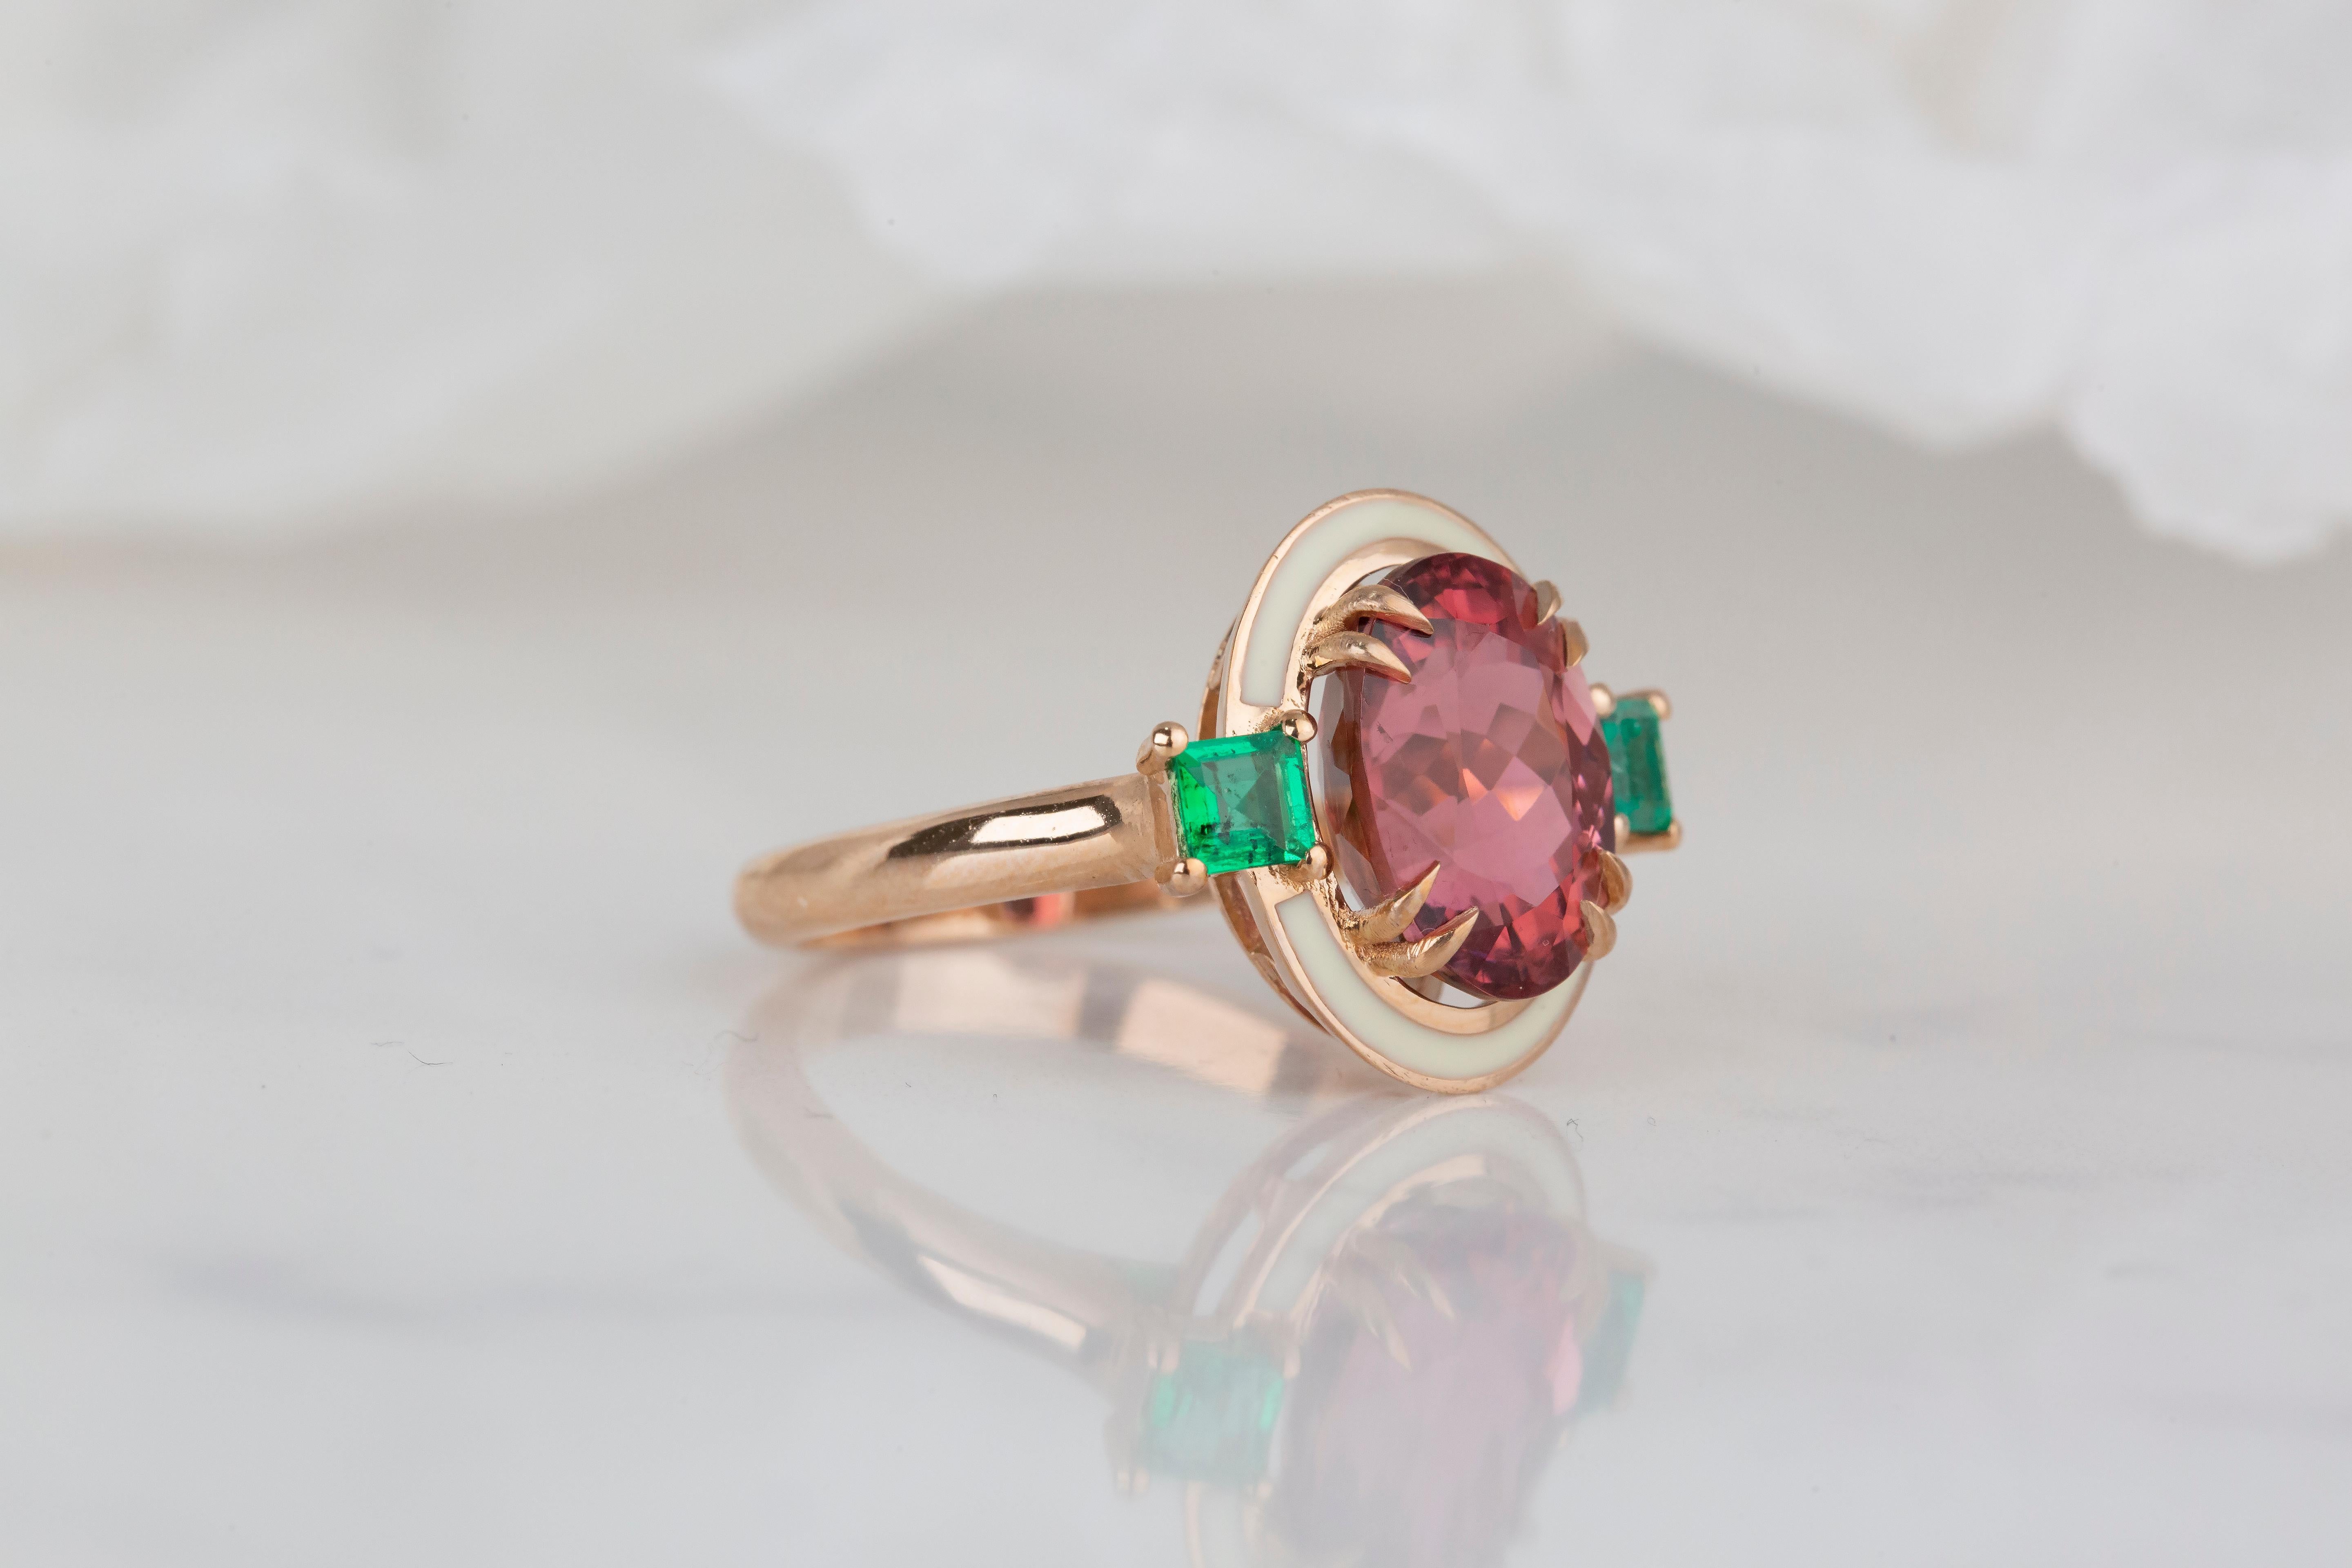 Art Deco Style 3.30 Ct Emerald and Ruby 14K Gold Cocktail Ring

Art Deco Style Enameled 14K Gold Cocktail Ring with Tourmaline and Sapphire

This ring was made with quality materials and excellent handwork. I guarantee the quality assurance of my